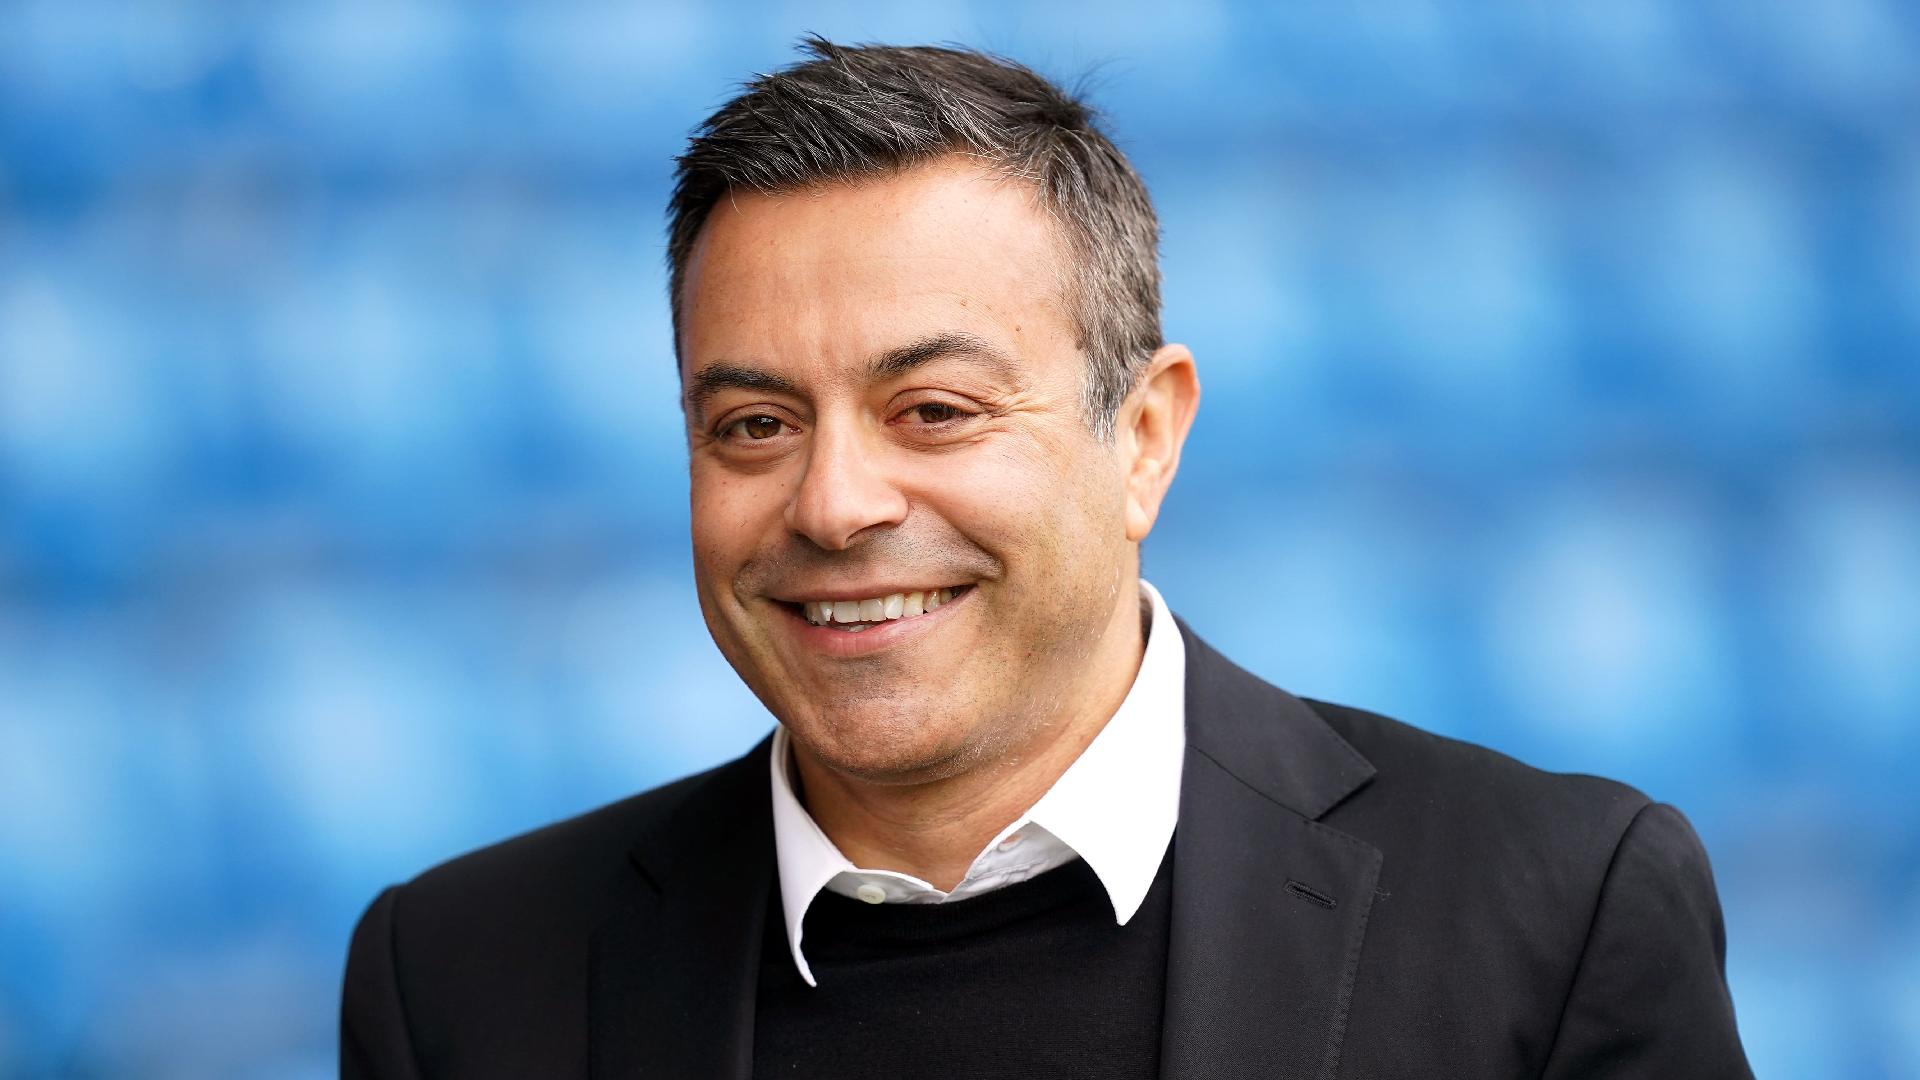 Radrizzani agrees to sell controlling Leeds stake